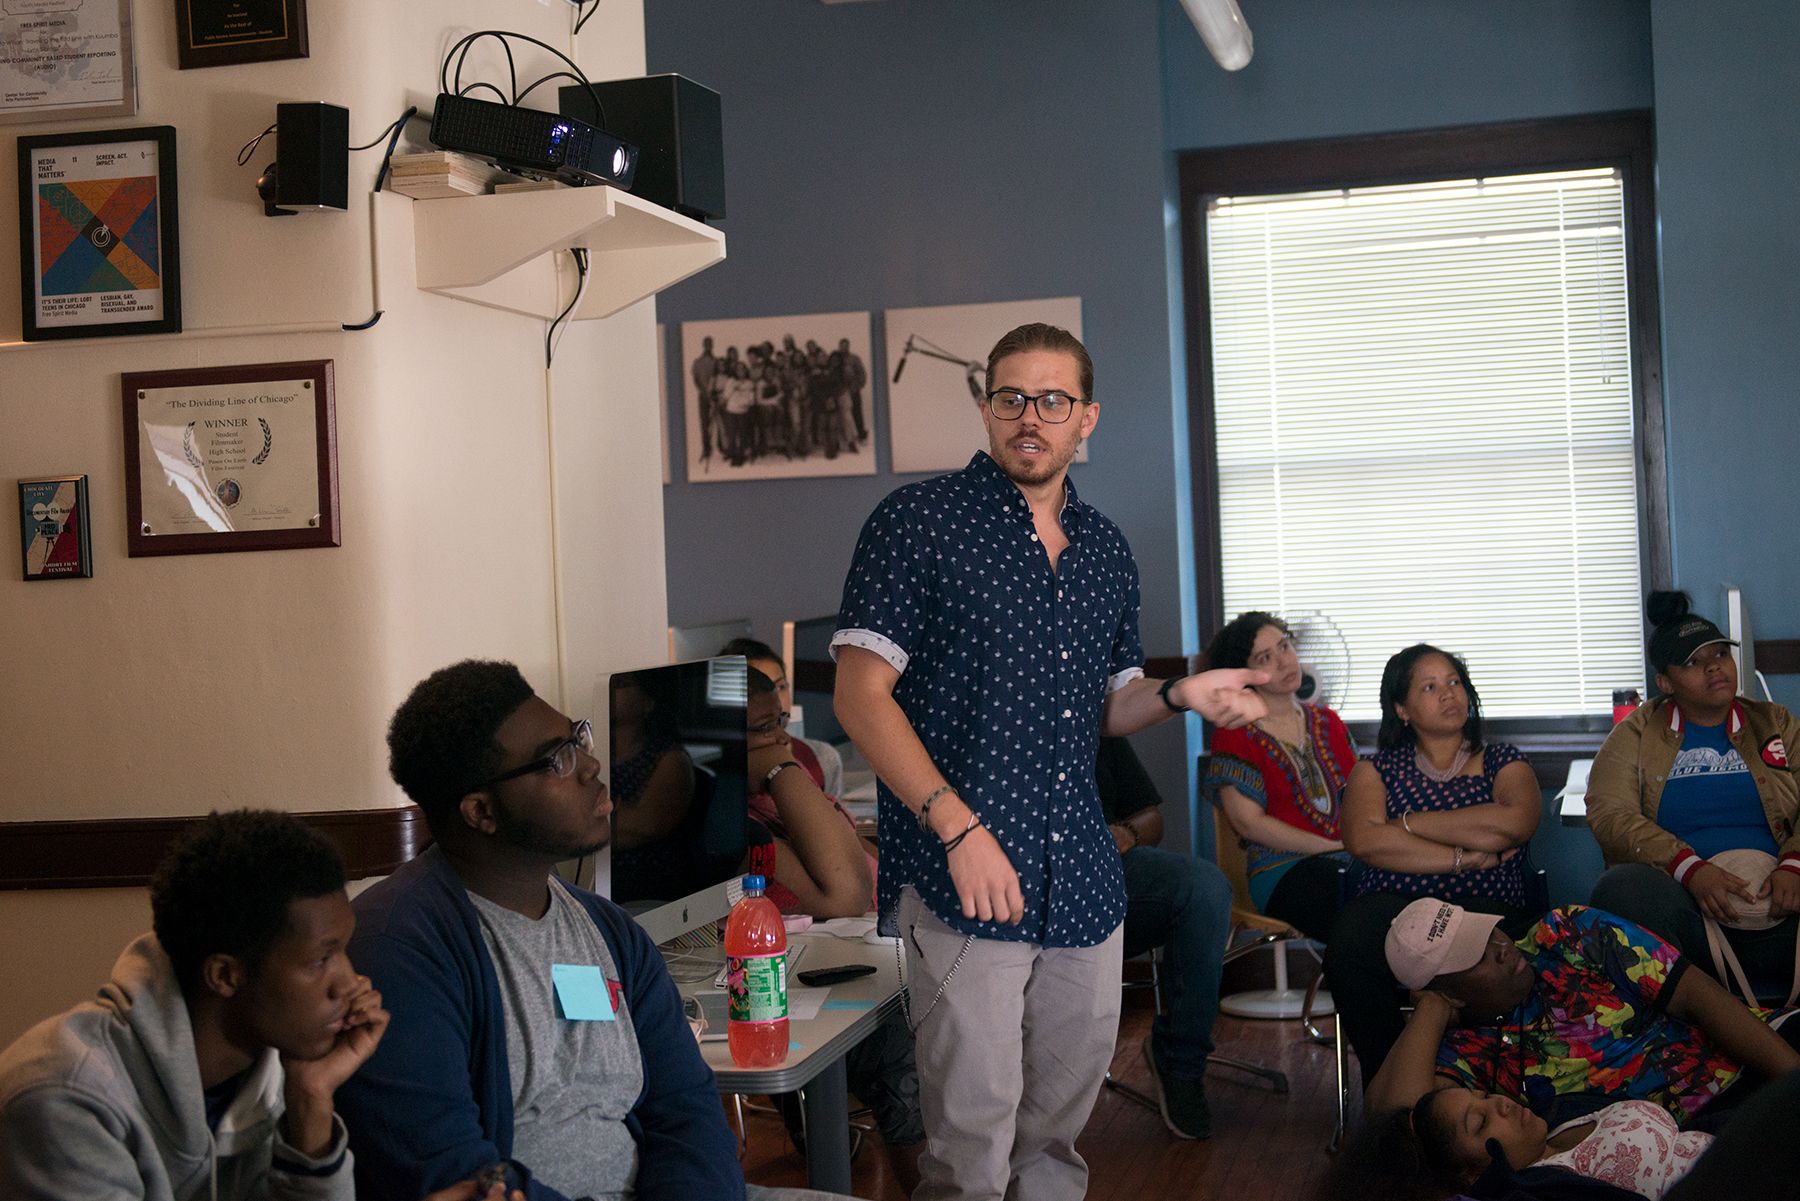 Dominic Bracco presents his reporting project to students at Free Spirit Media. His project follows Diego, a man who left his violent past in Juarez, Mexico. Image by Jordan Roth. United States, 2017.